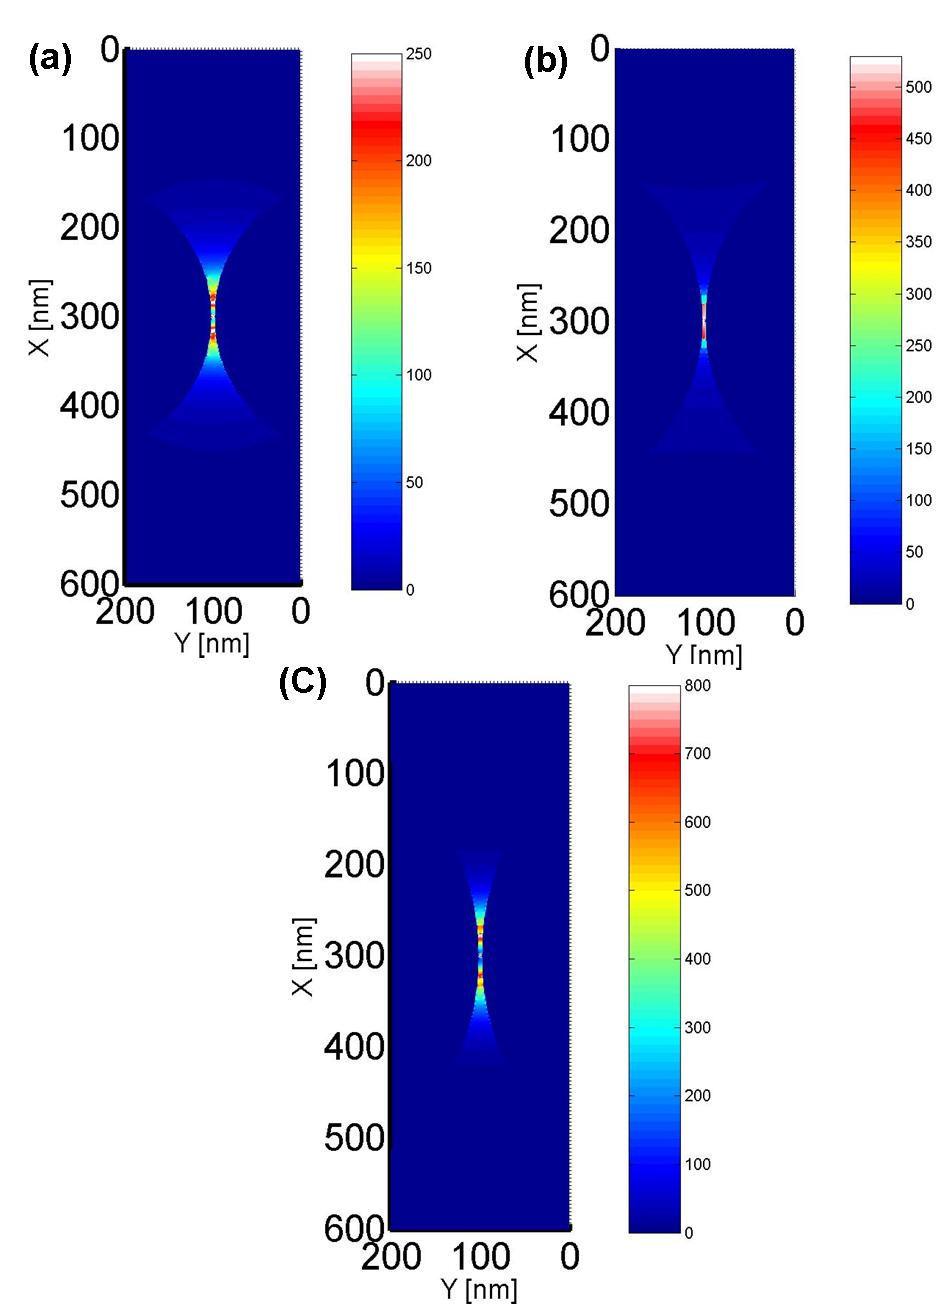 -S196- Journal of the Korean Physical Society, Vol. 47, August 2005 Fig. 2. Far-field transmittance and reflectance of periodic modulation for periodic nanocylinders with (a) 6 nm and (b) 10 nm separation.